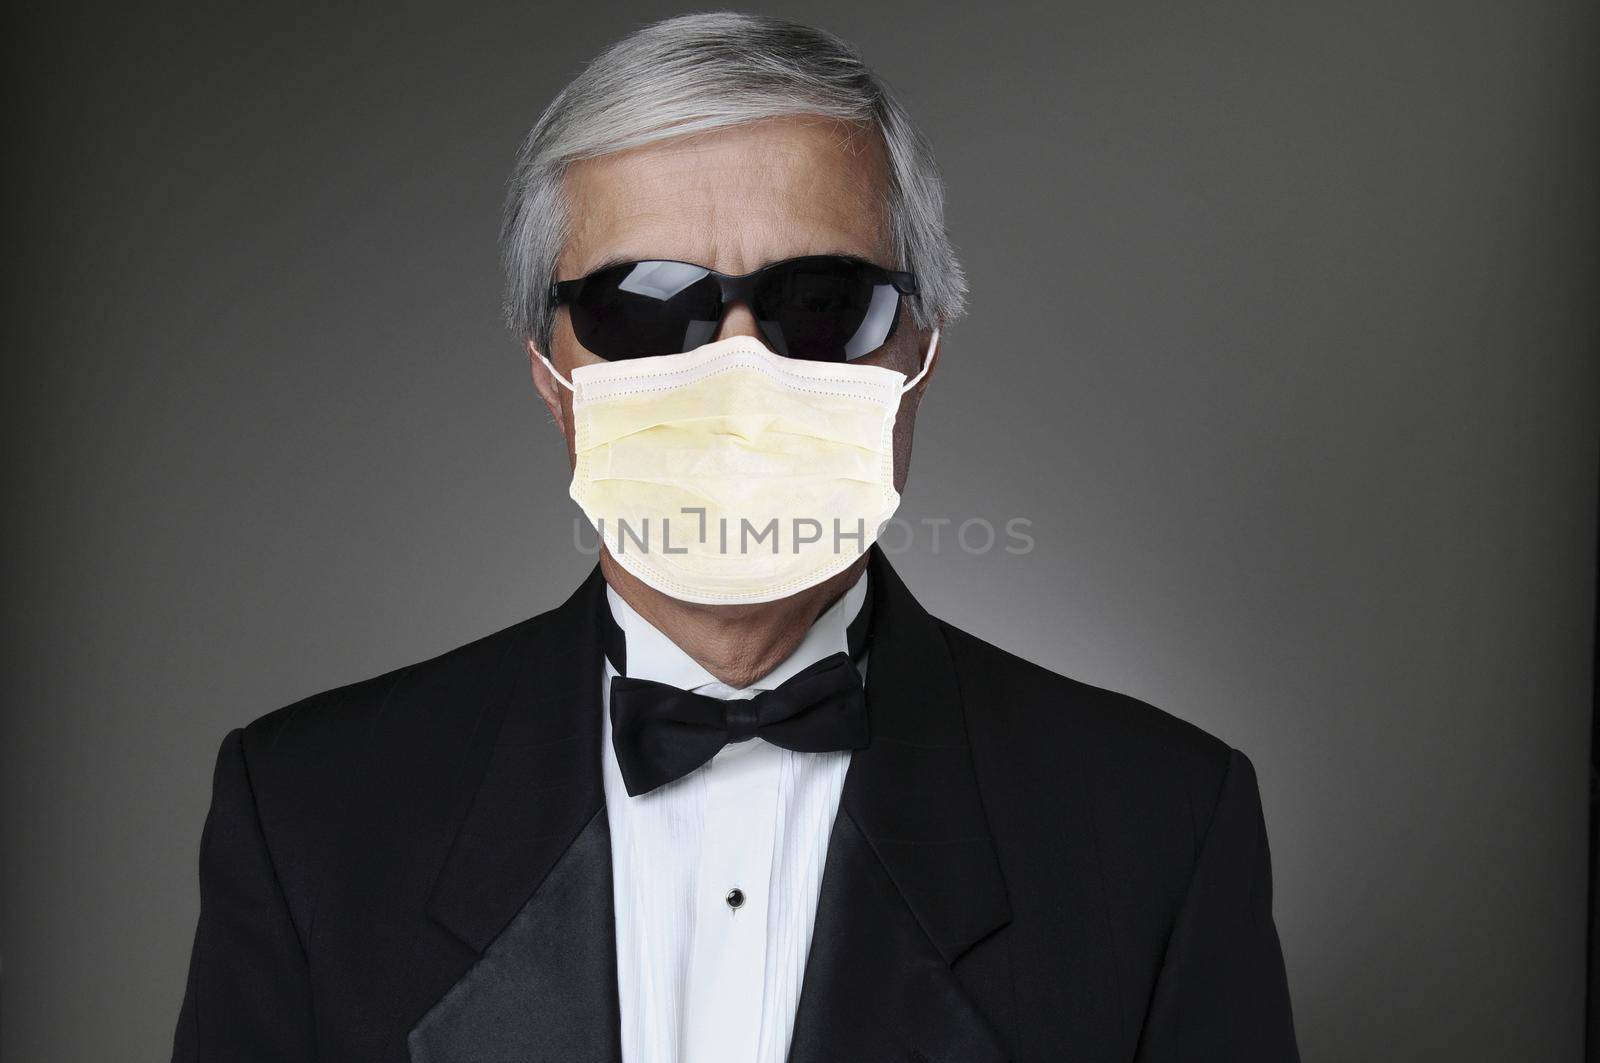 Portrait of a middle aged man in a tuxedo wearing a COVID-19 protective mask and sunglasses. Horizontal format over a gray background. by sCukrov